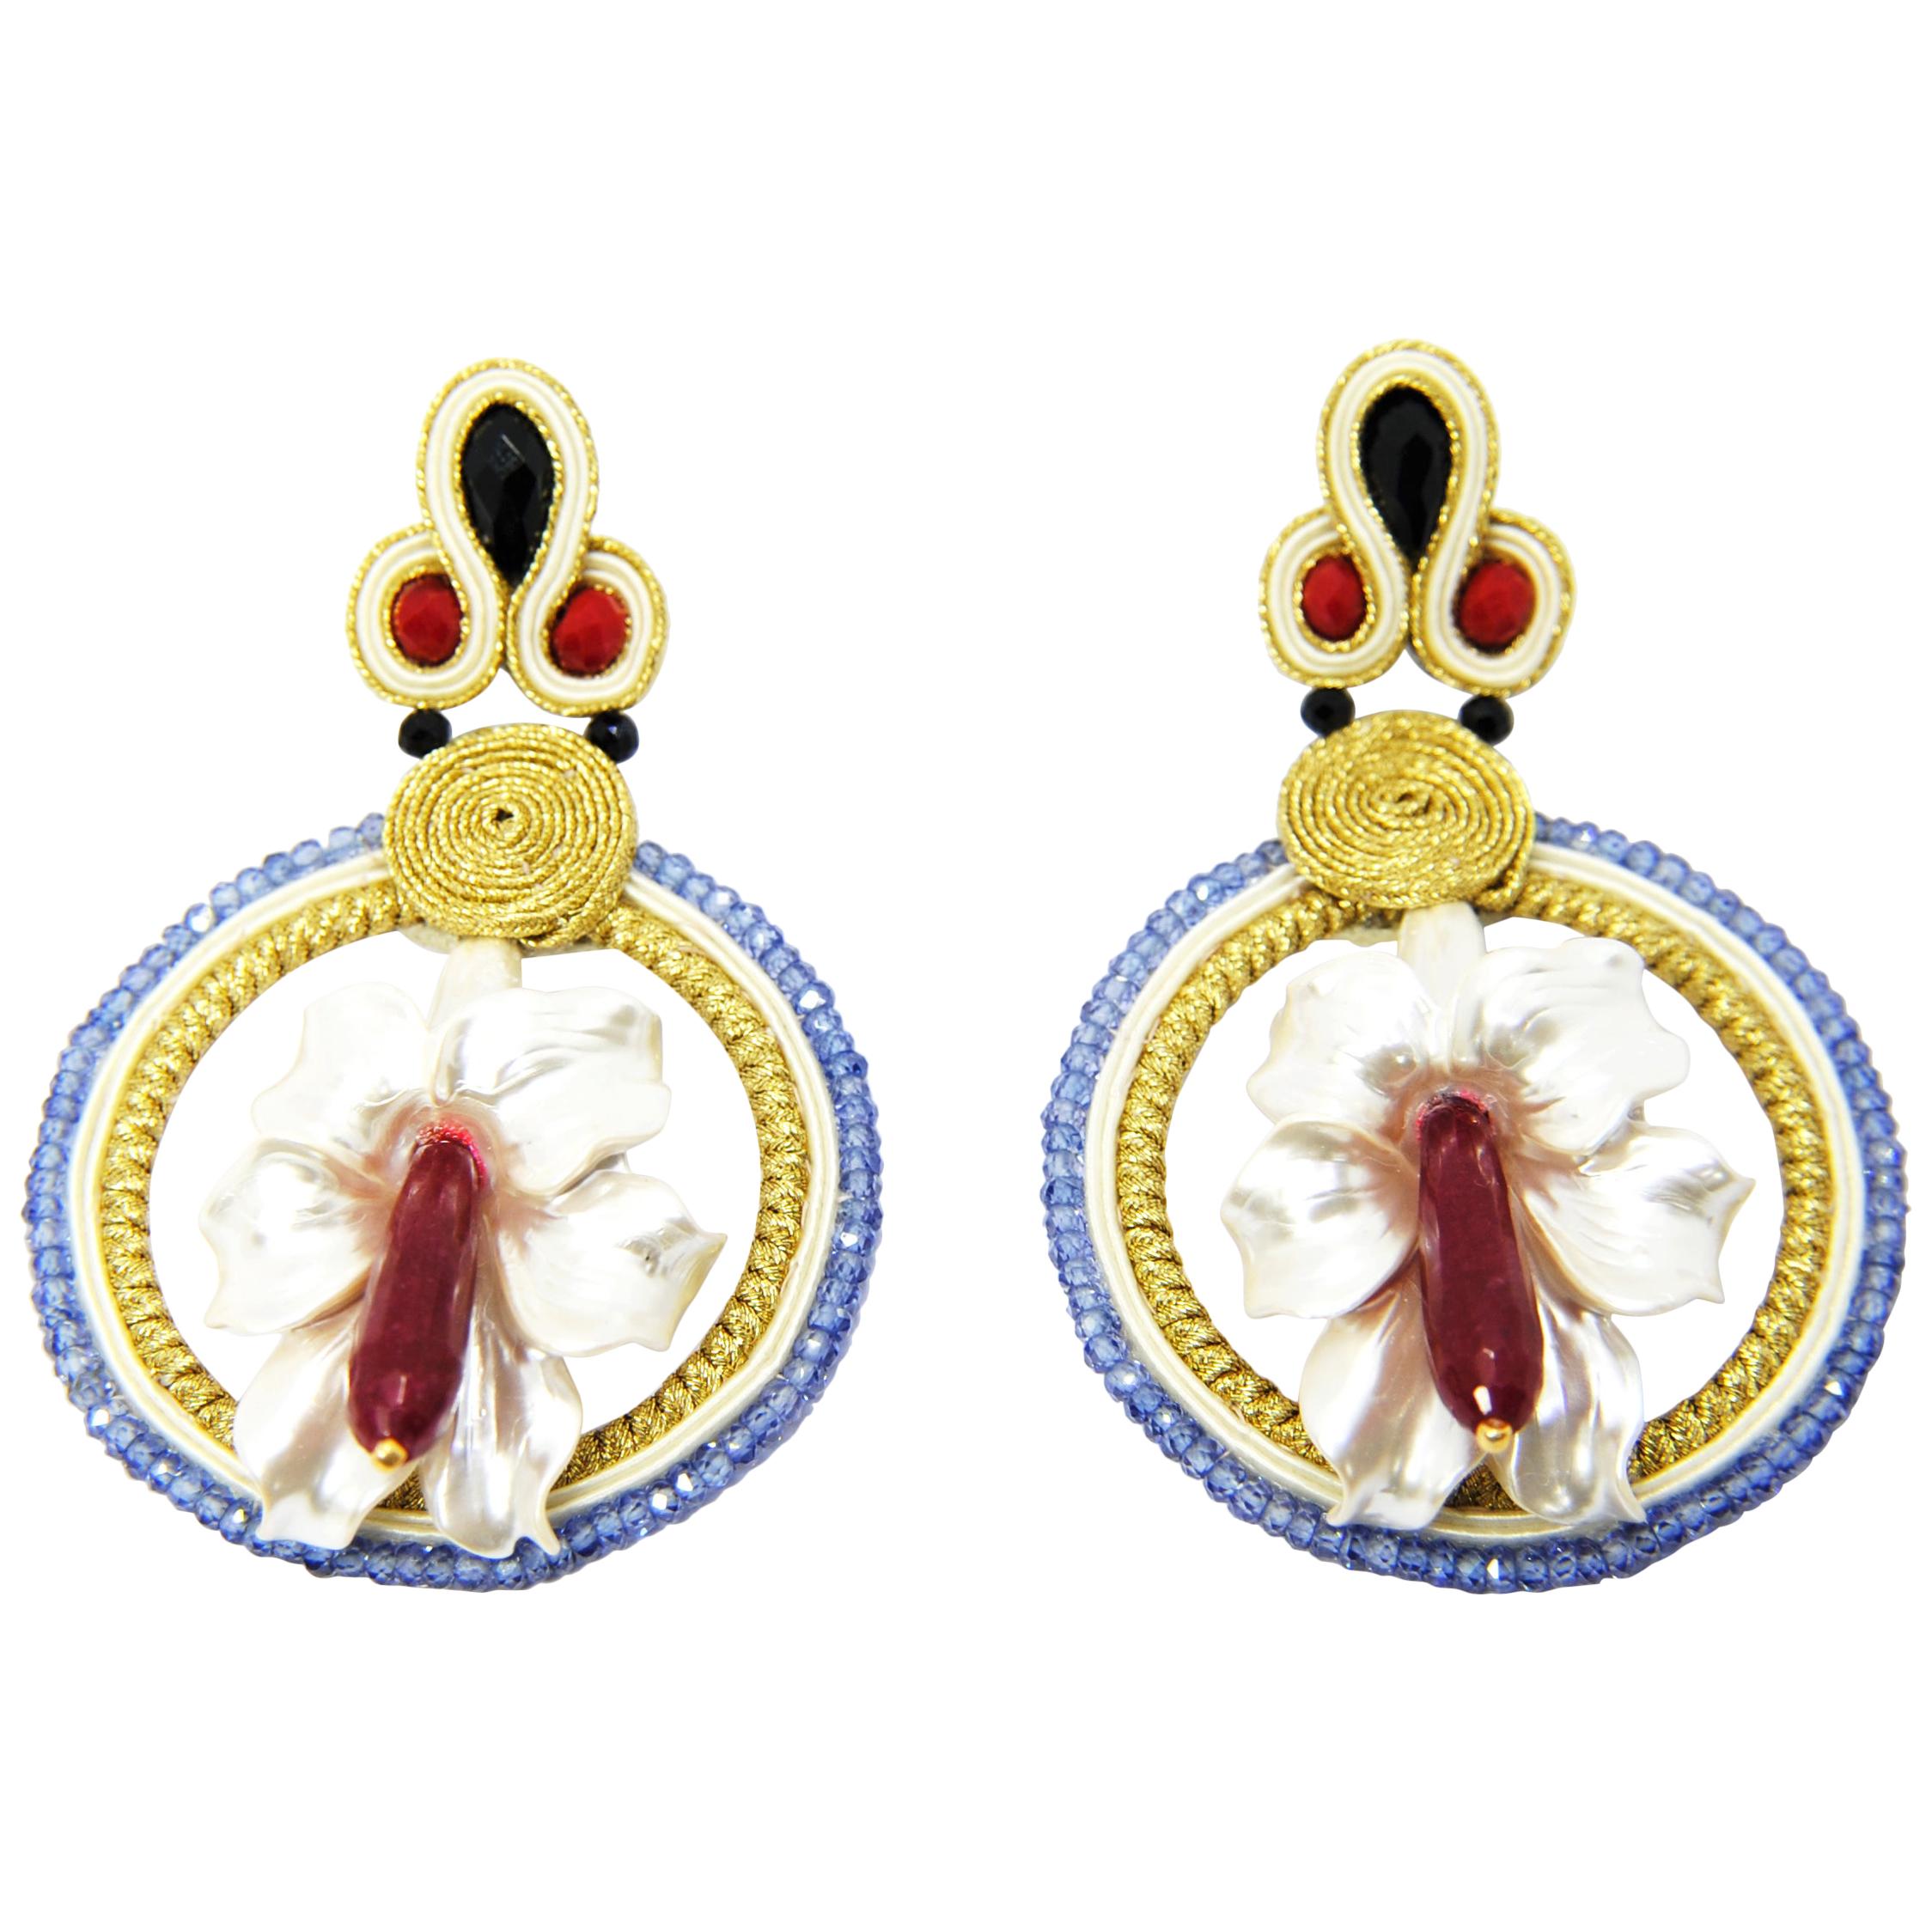 Pradera Kalas Collection Soutache Silver Earrings Iolites and Red Jade For Sale